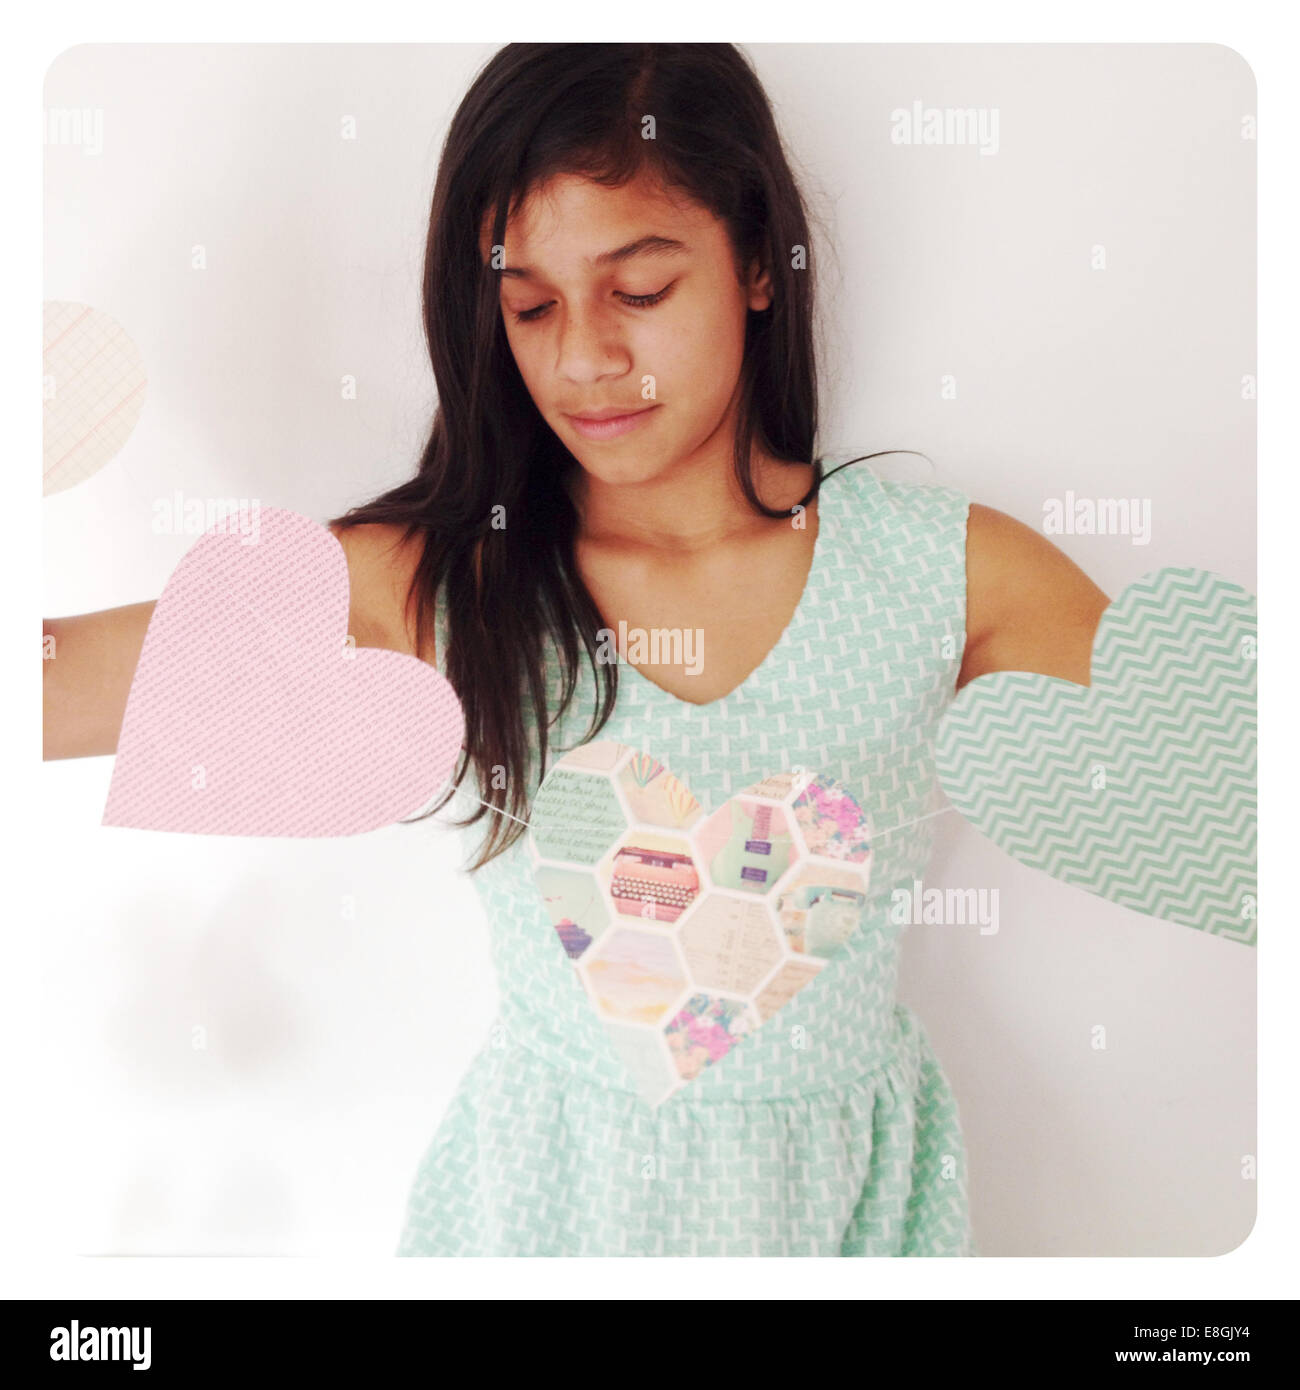 Girl holding a Valentine's Day decorative banner with heart shapes Stock Photo